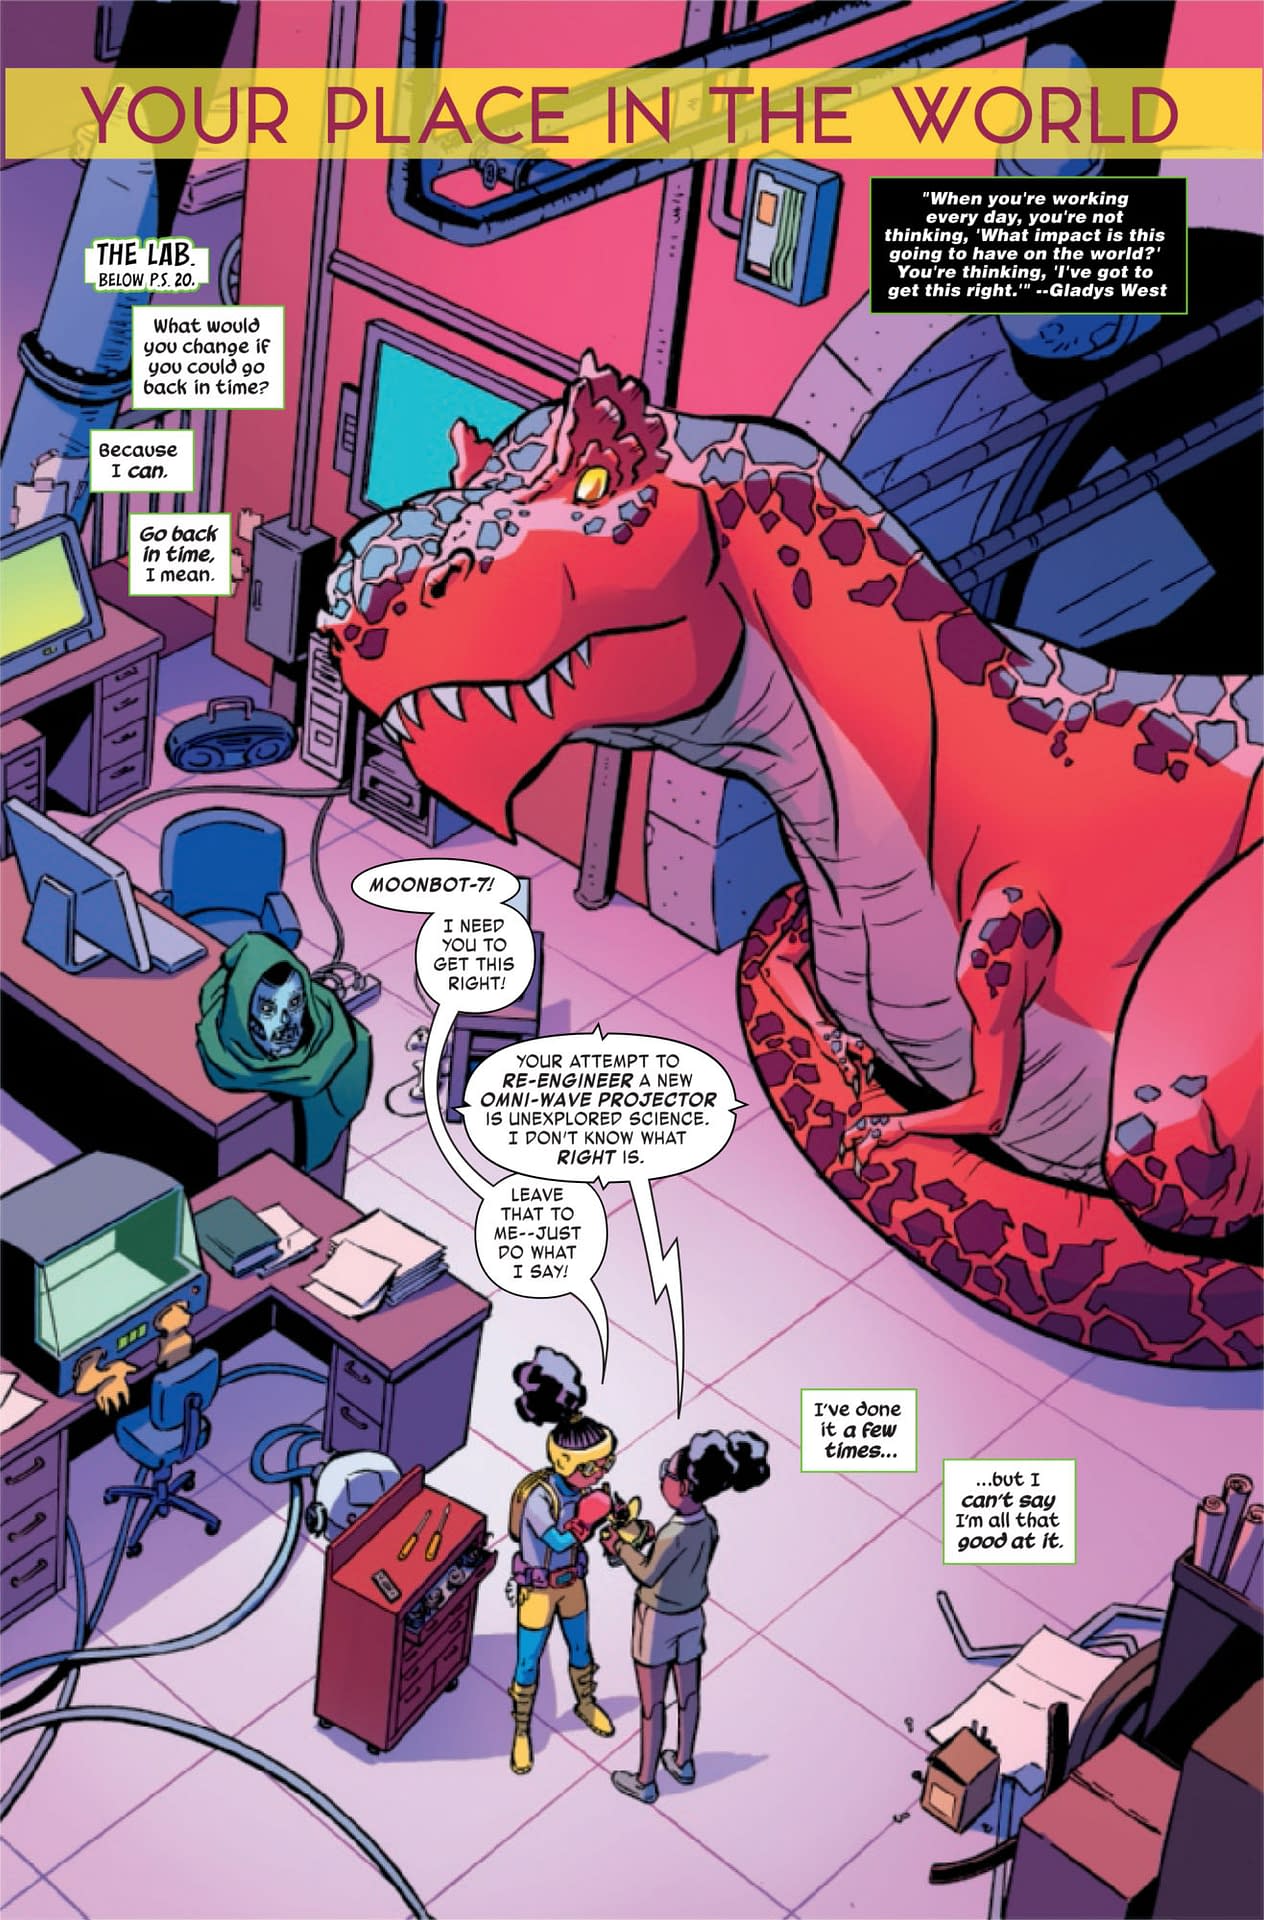 Moon Girl Pulls a Marty McFly - Moon Girl and Devil Dinosaur #44 Preview